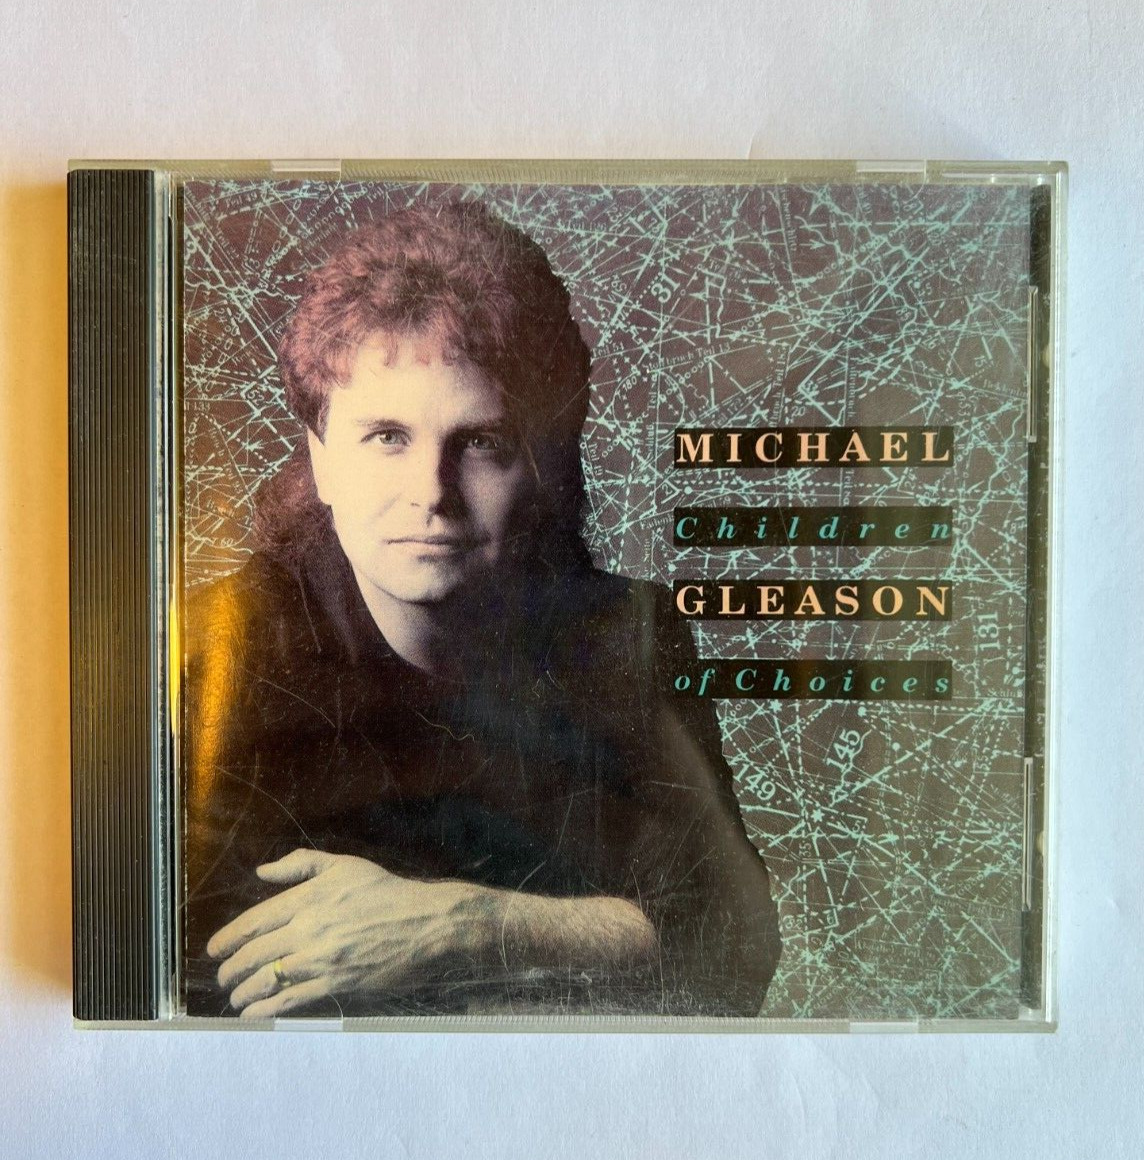 1990 Michael Gleeson Children of Choices CD by Pakaderm Records